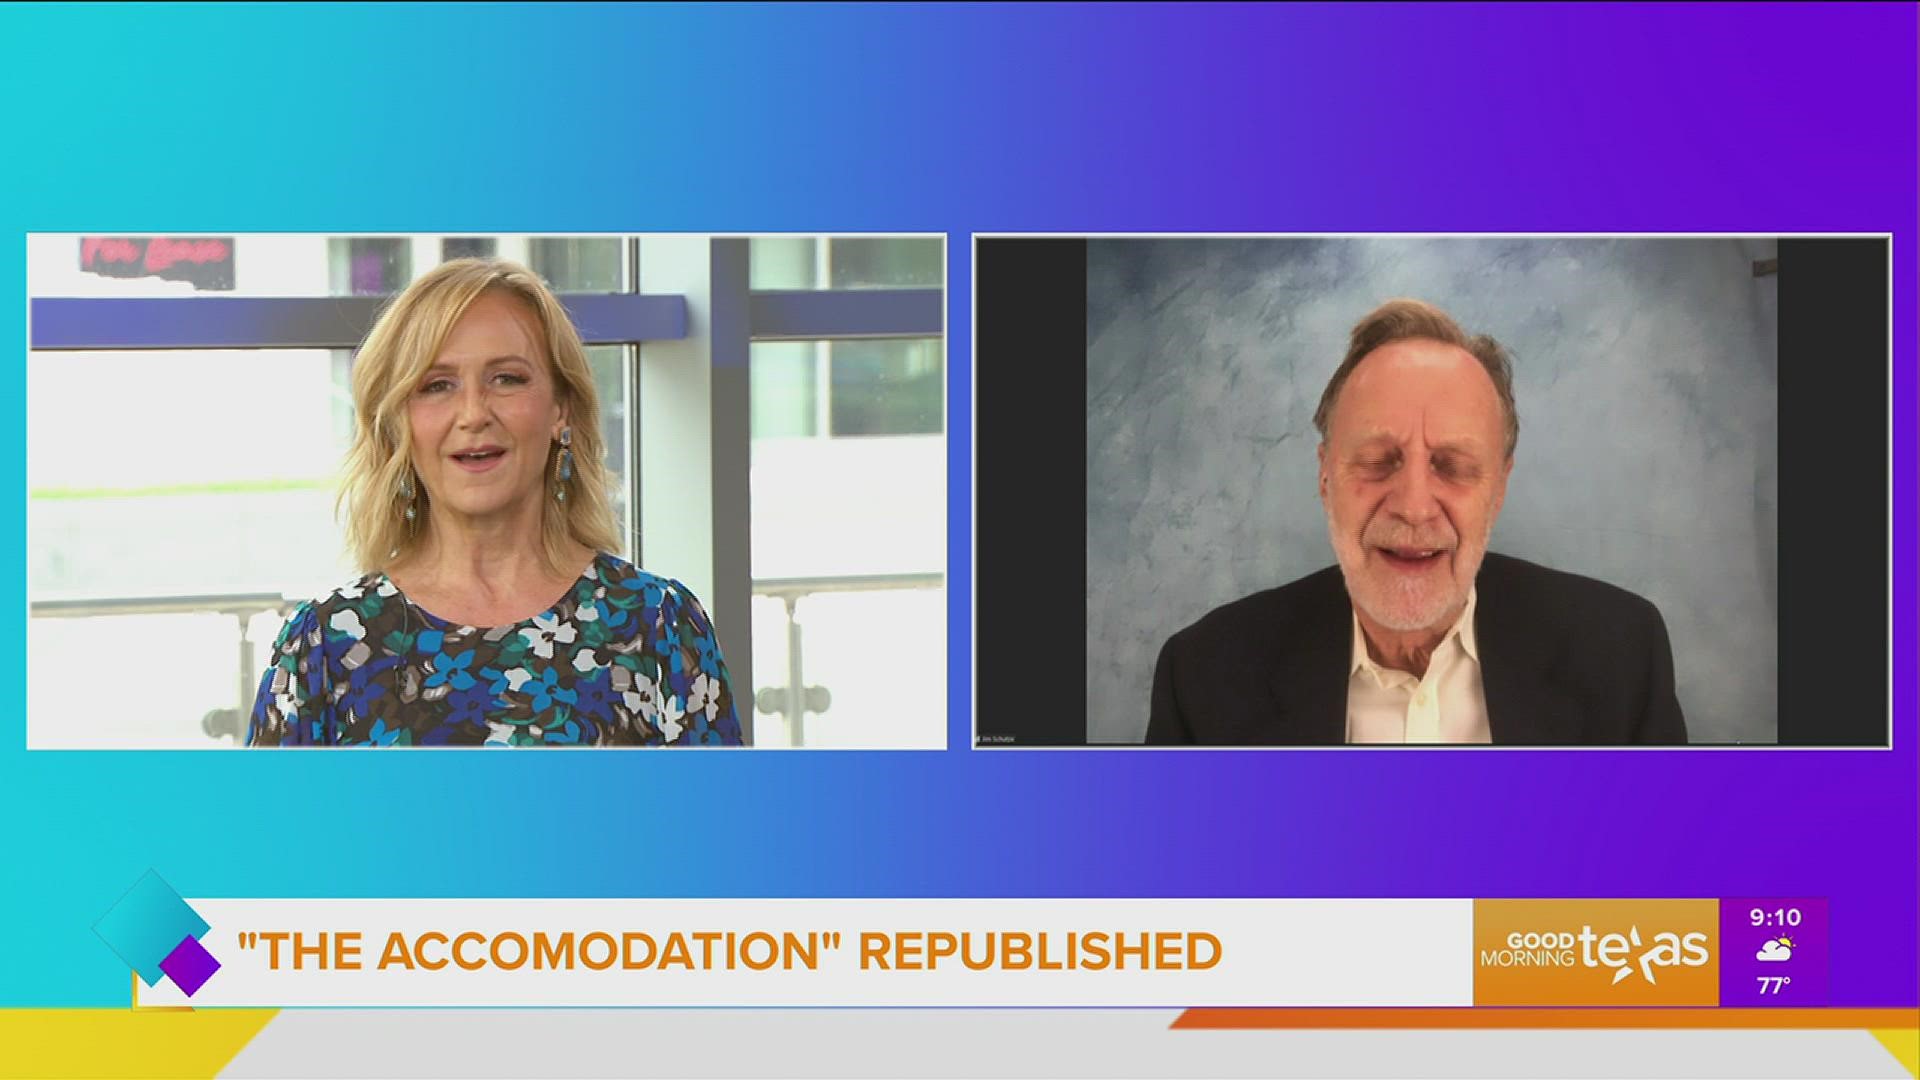 Jim Shutze talks about his book "The Accommodation: The Politics of Race in an American City"